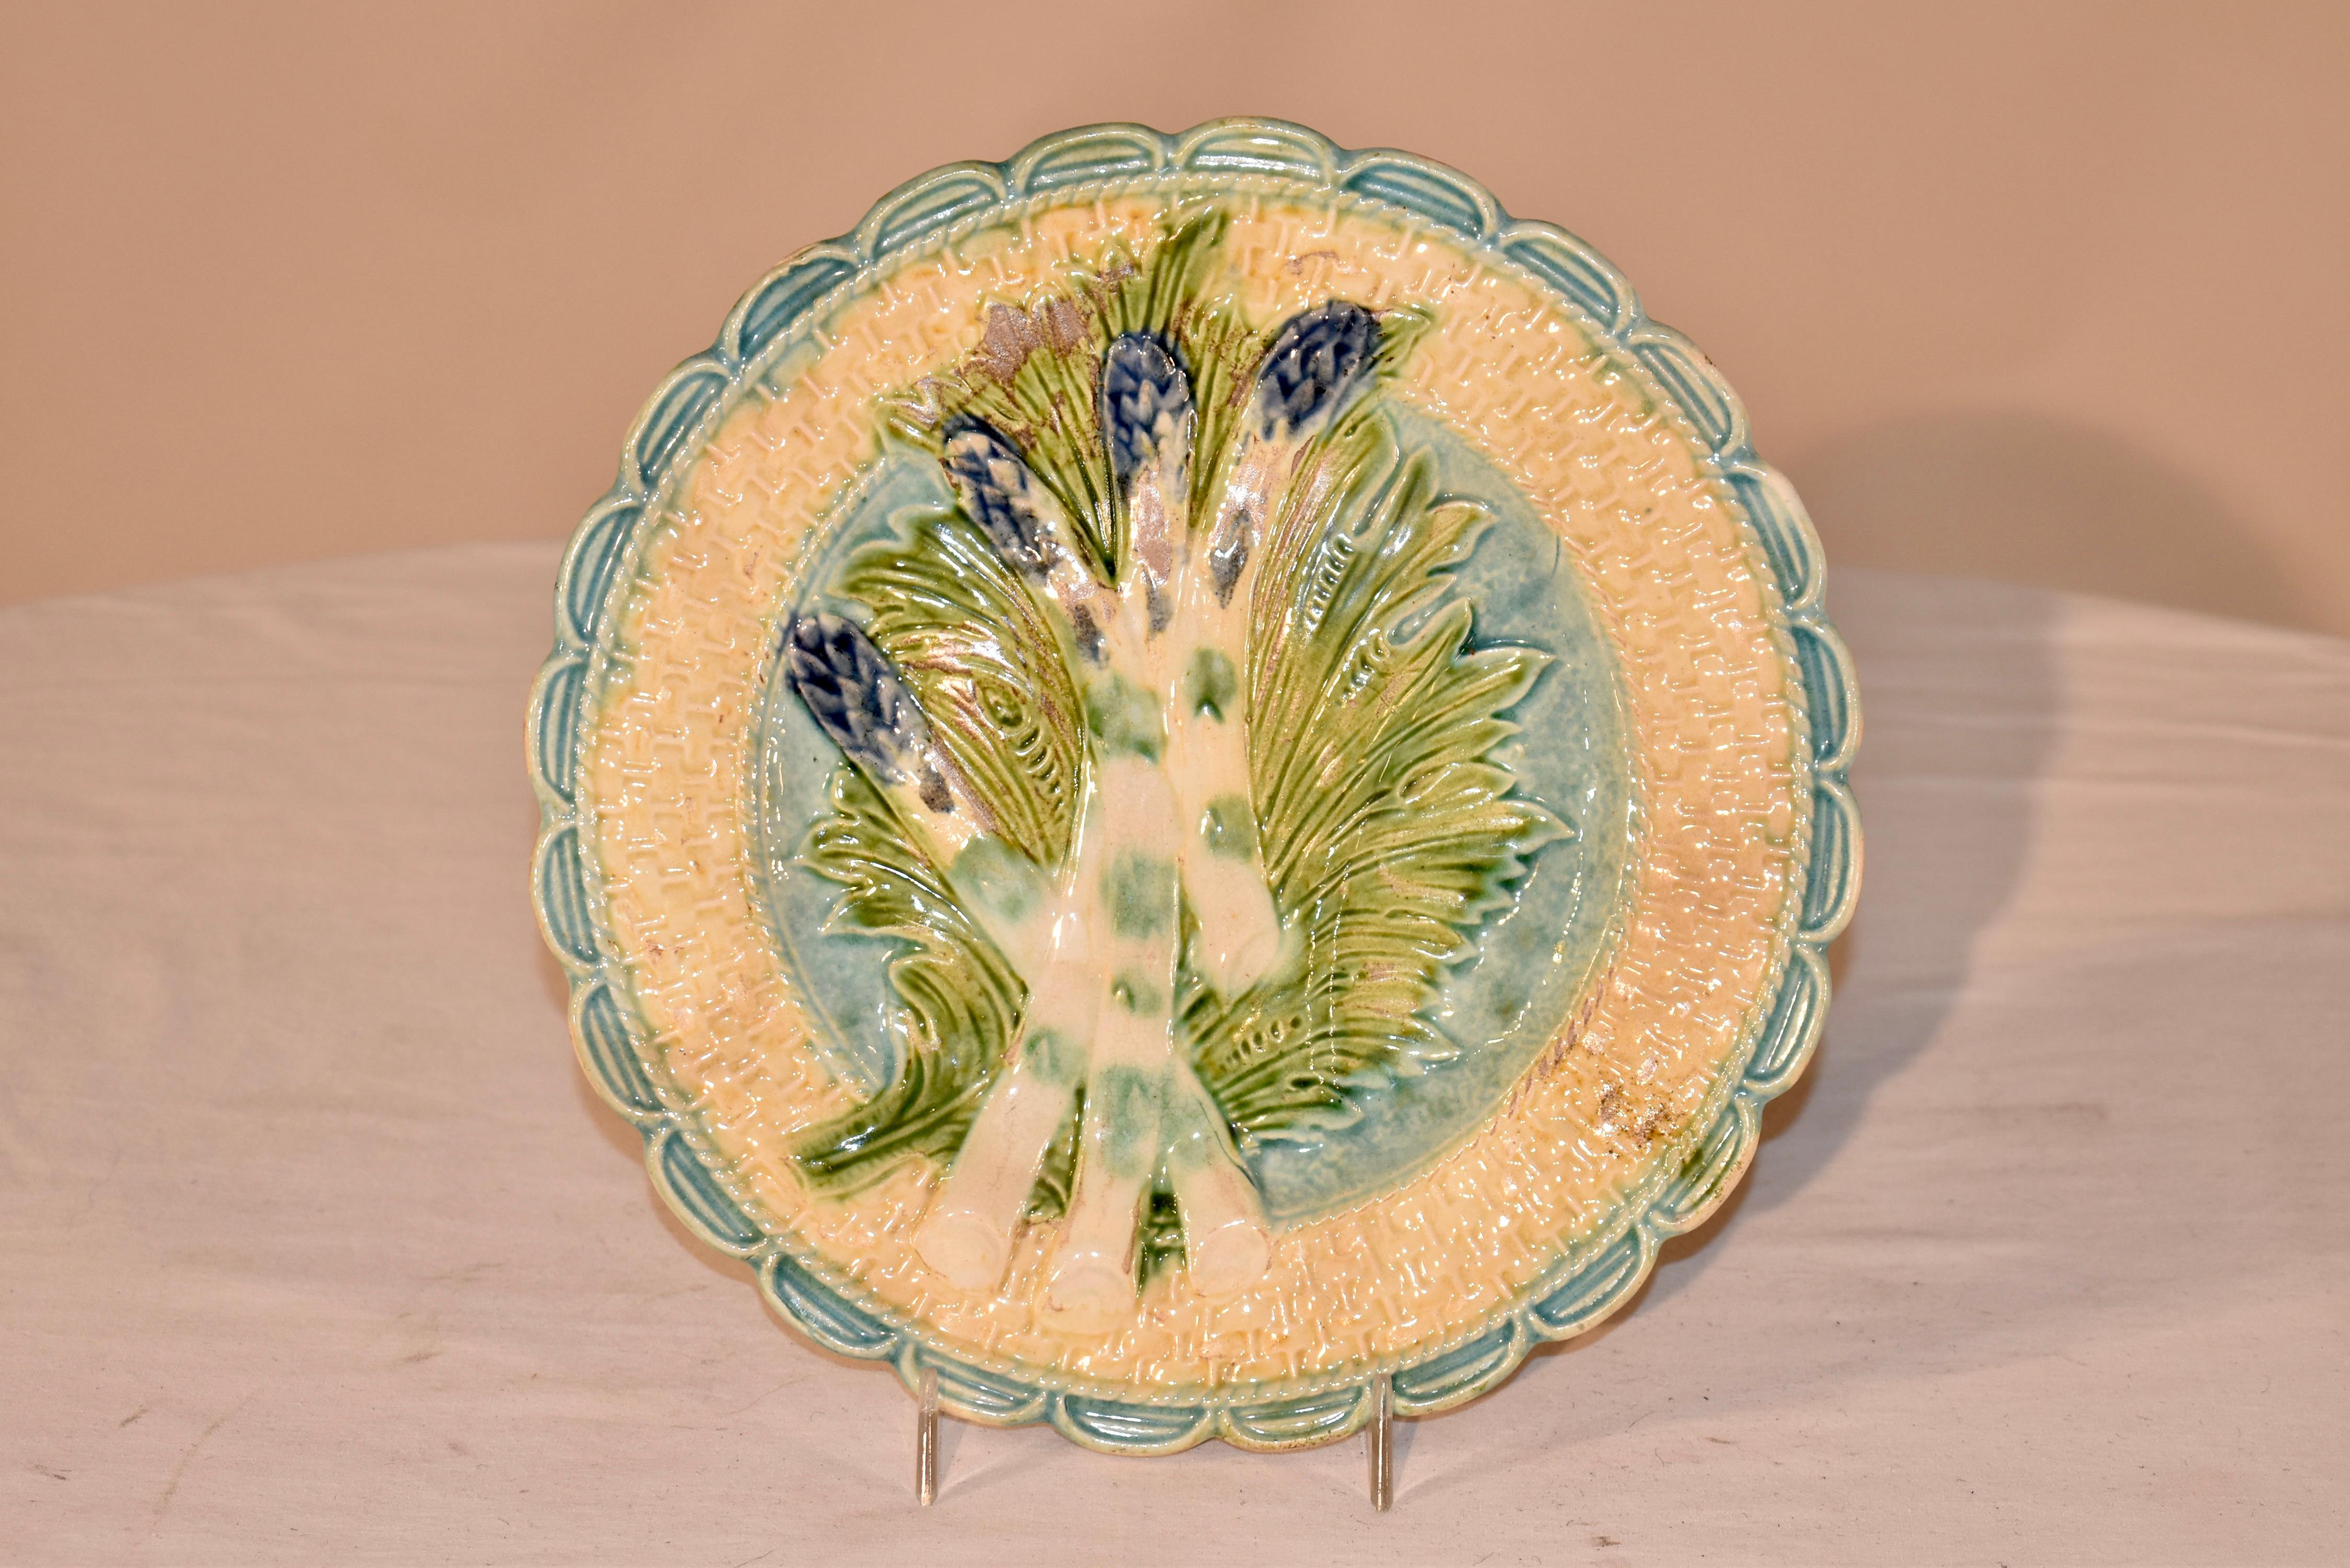 Late 19th century French Majolica asparagus plate made by Salins, circa 1880. The asparagus is lain on a bed of leaves and appears to be in a basket with a scalloped border. Lovely color and size.